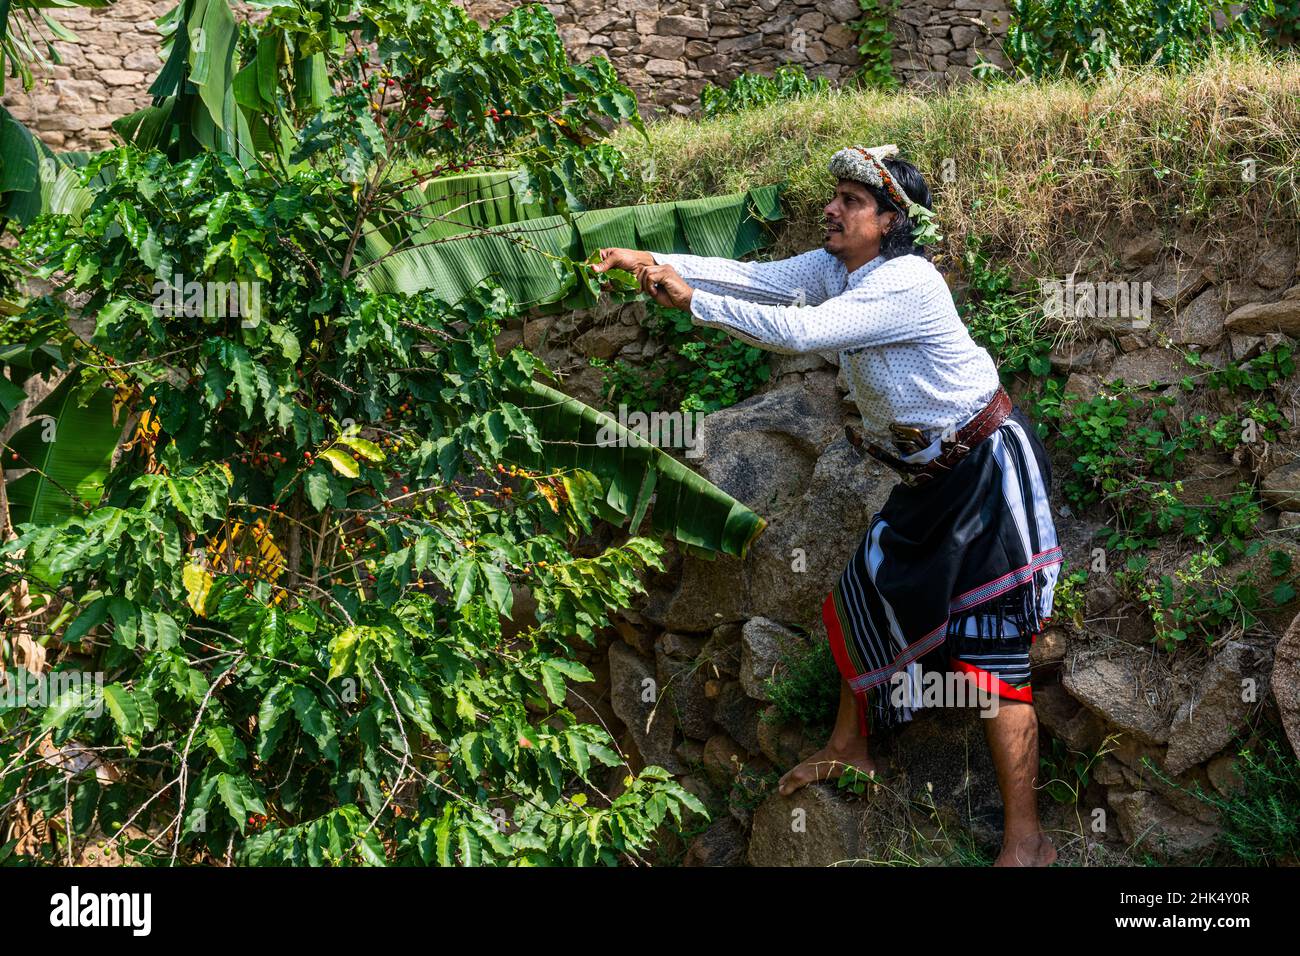 Traditional dressed man of the Qahtani Flower men tribe in the coffee plants, examining the coffee beans, Asir Mountains, Kingdom of Saudi Arabia Stock Photo